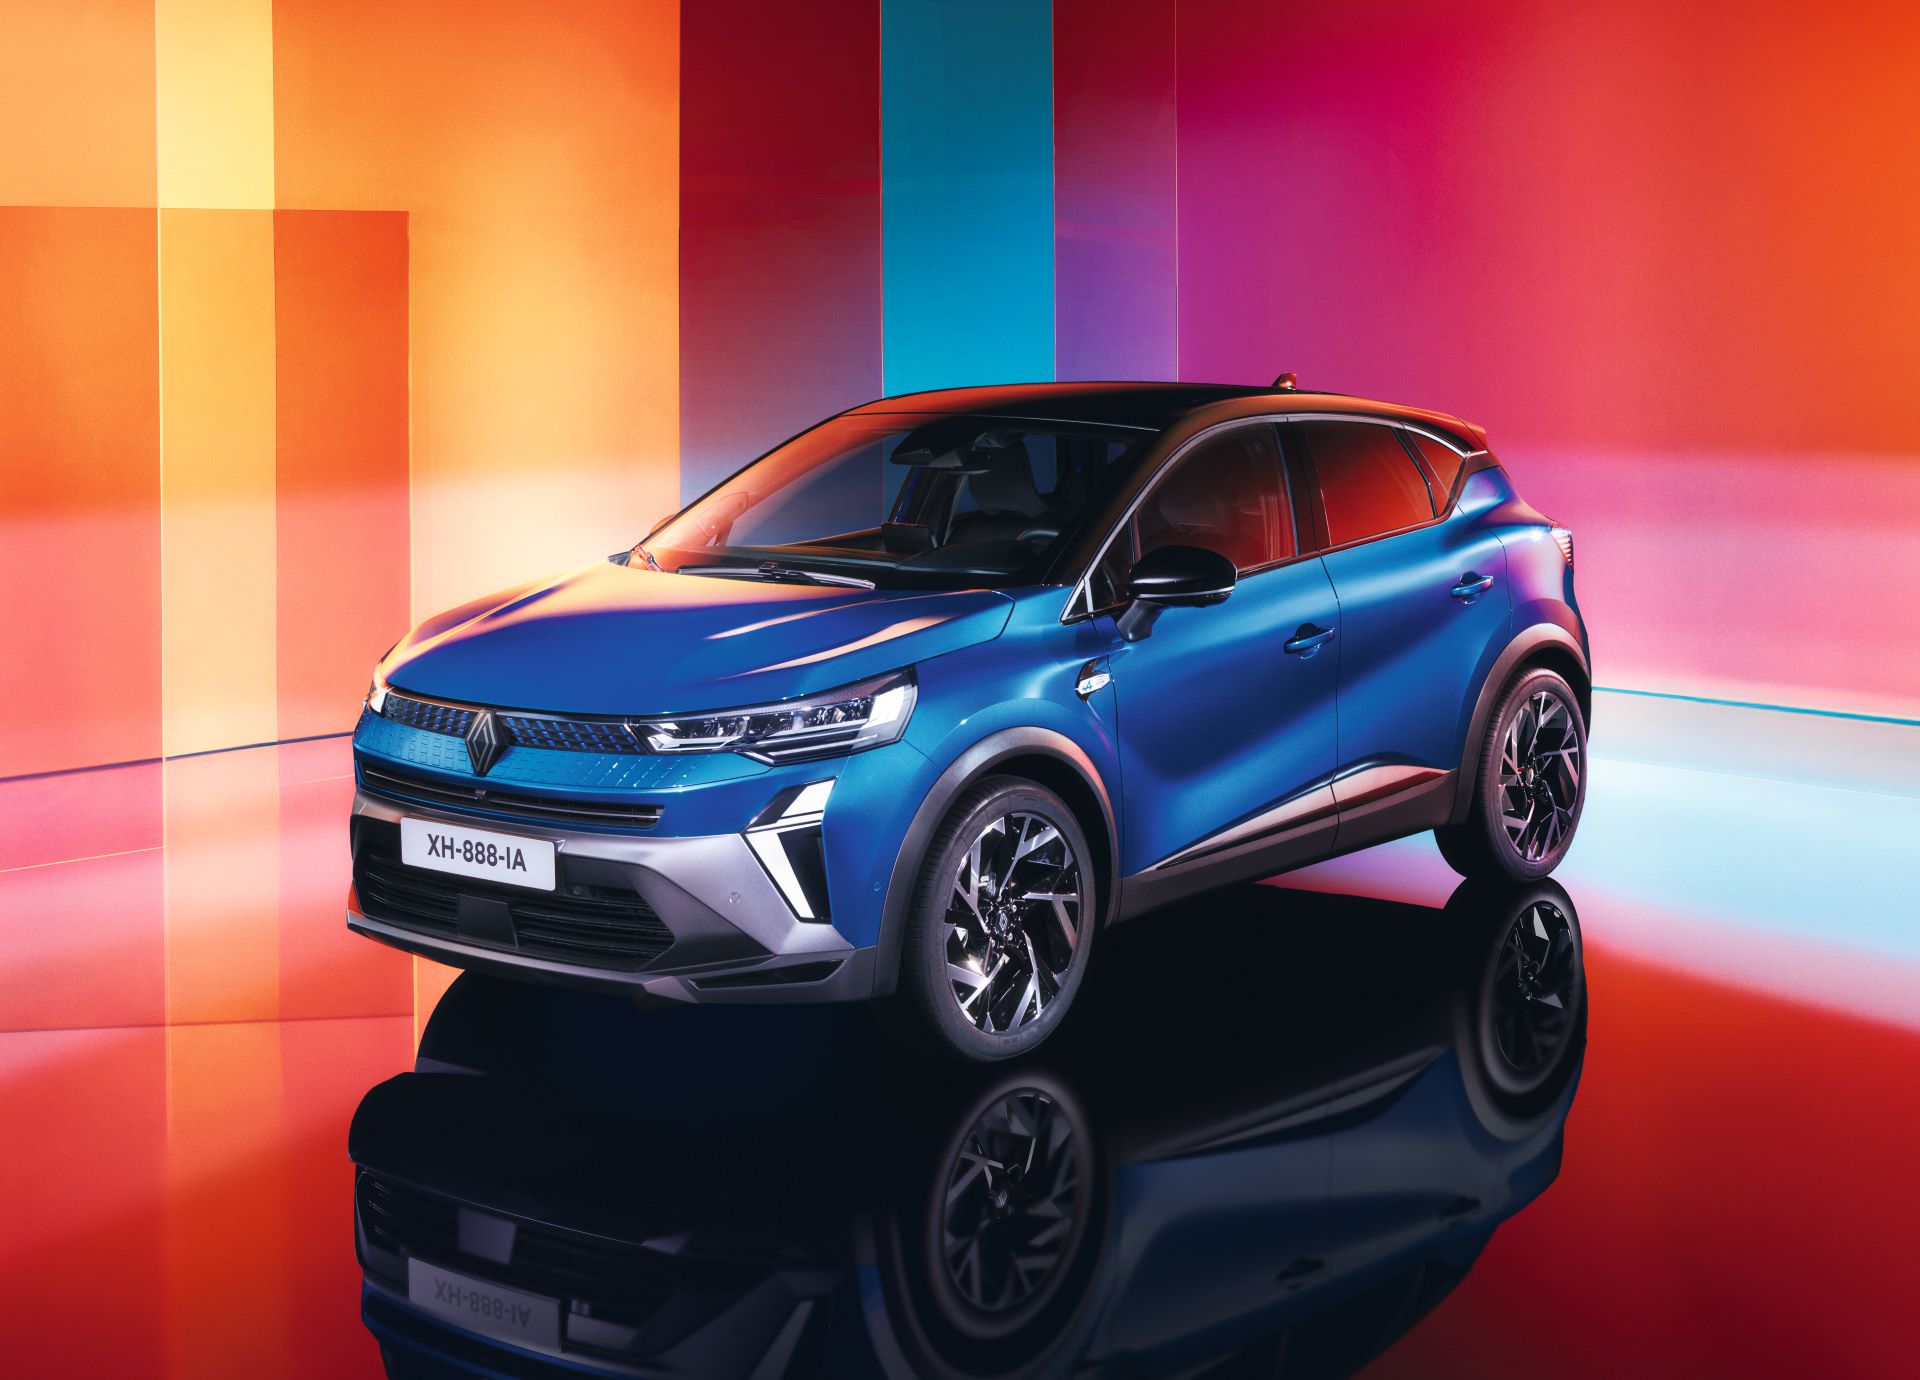 Introducing the New Renault Captur